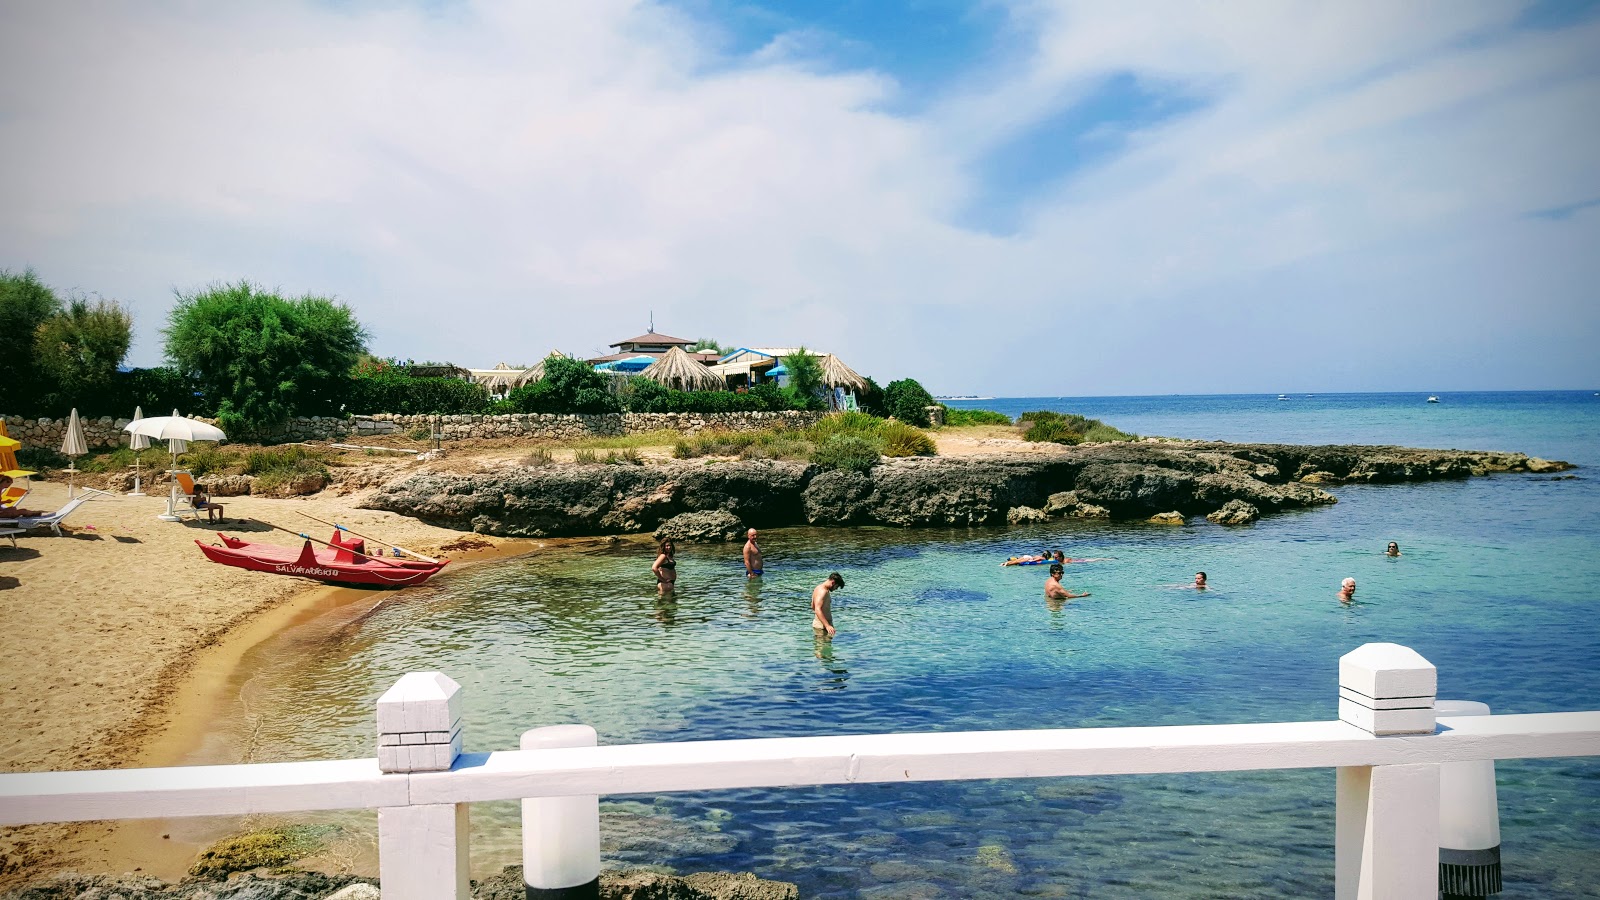 Photo of La Fonte beach - popular place among relax connoisseurs